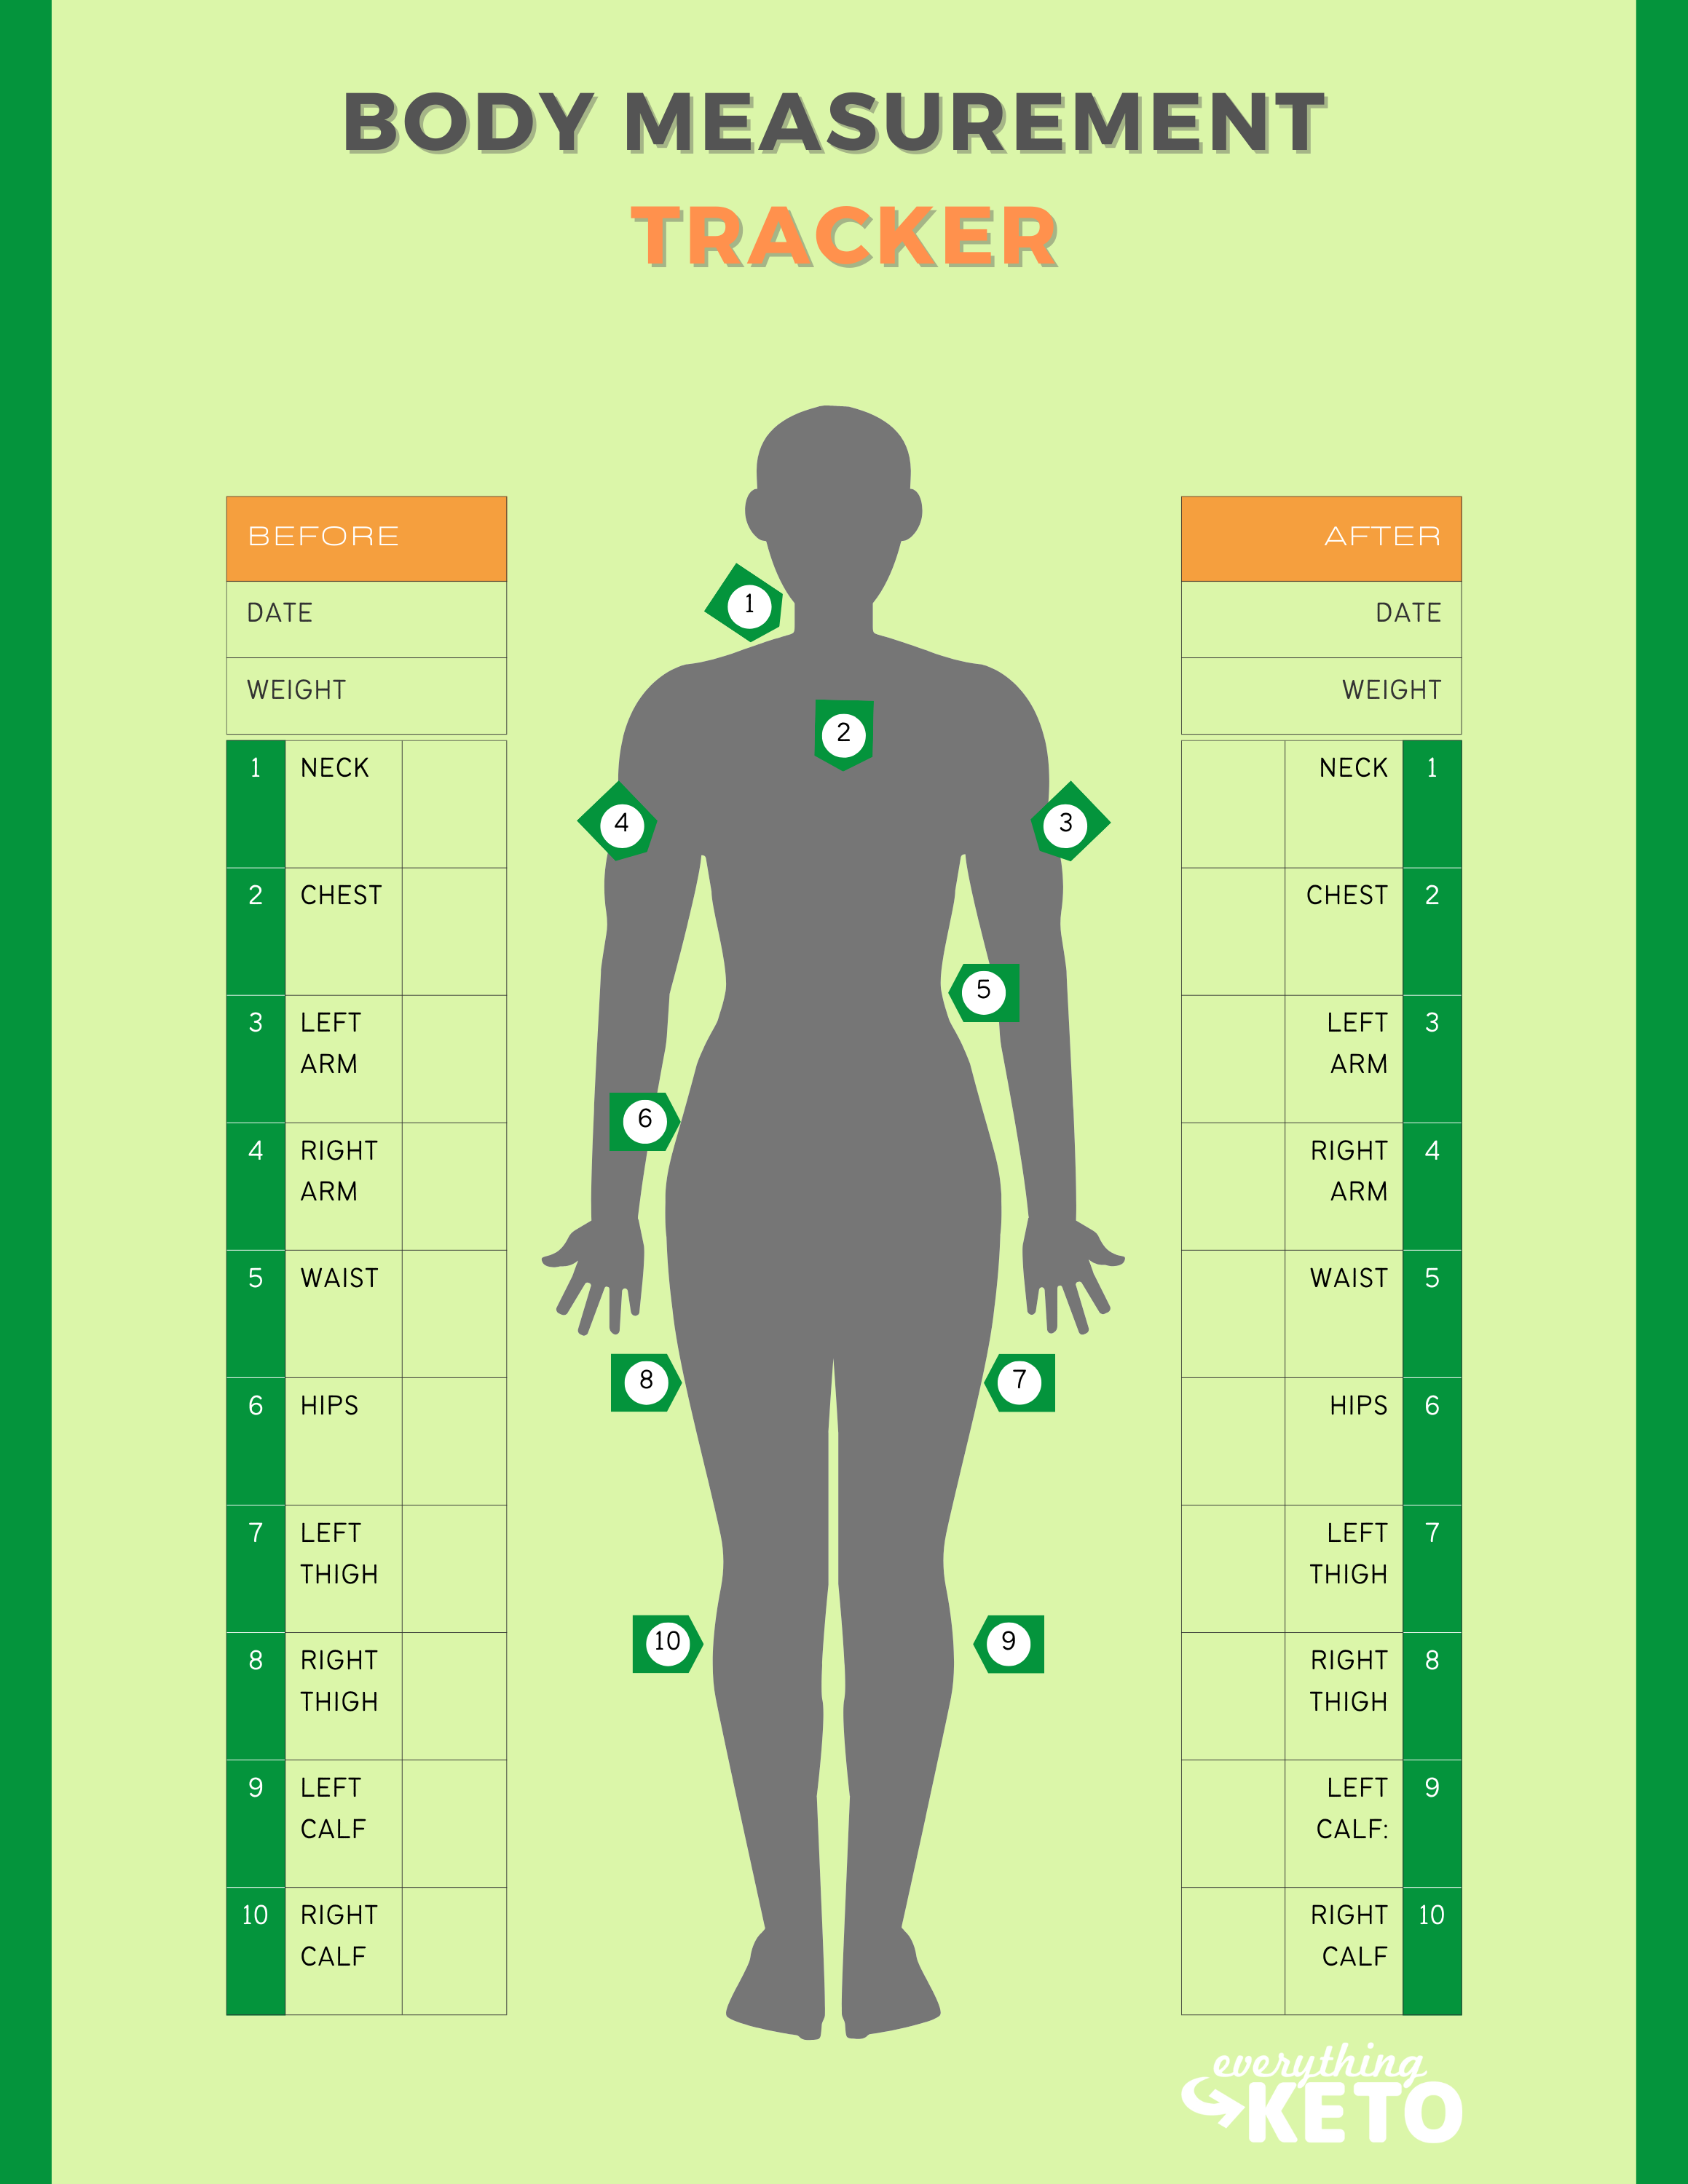 A human body design to show measurements before and after